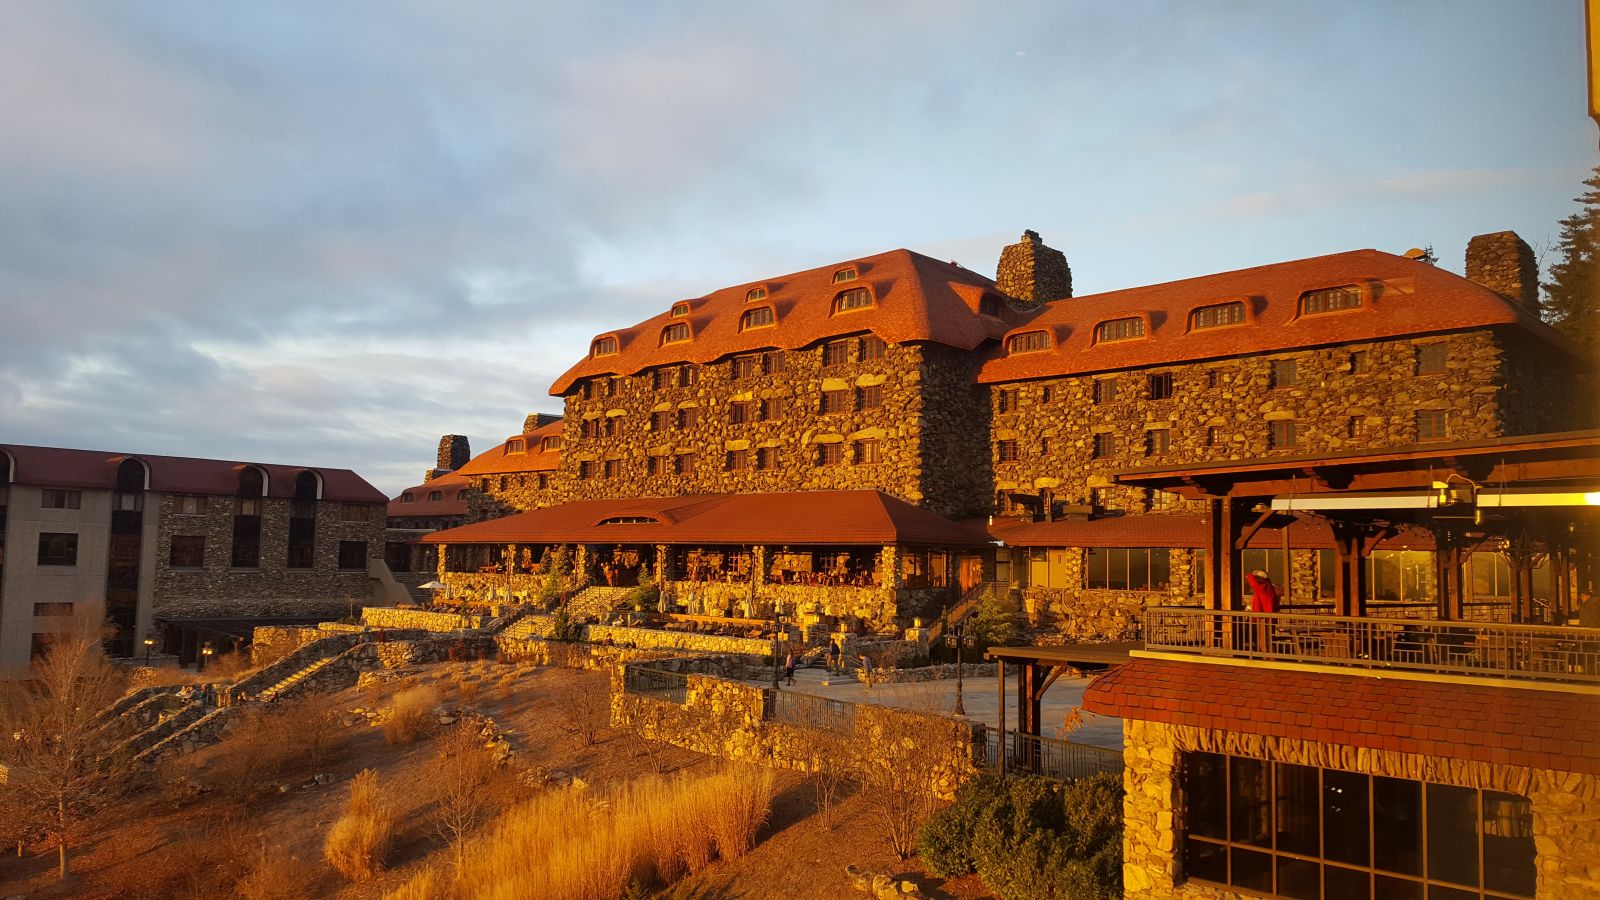 large, stone-walled hotel with an orange roof in the sunlight